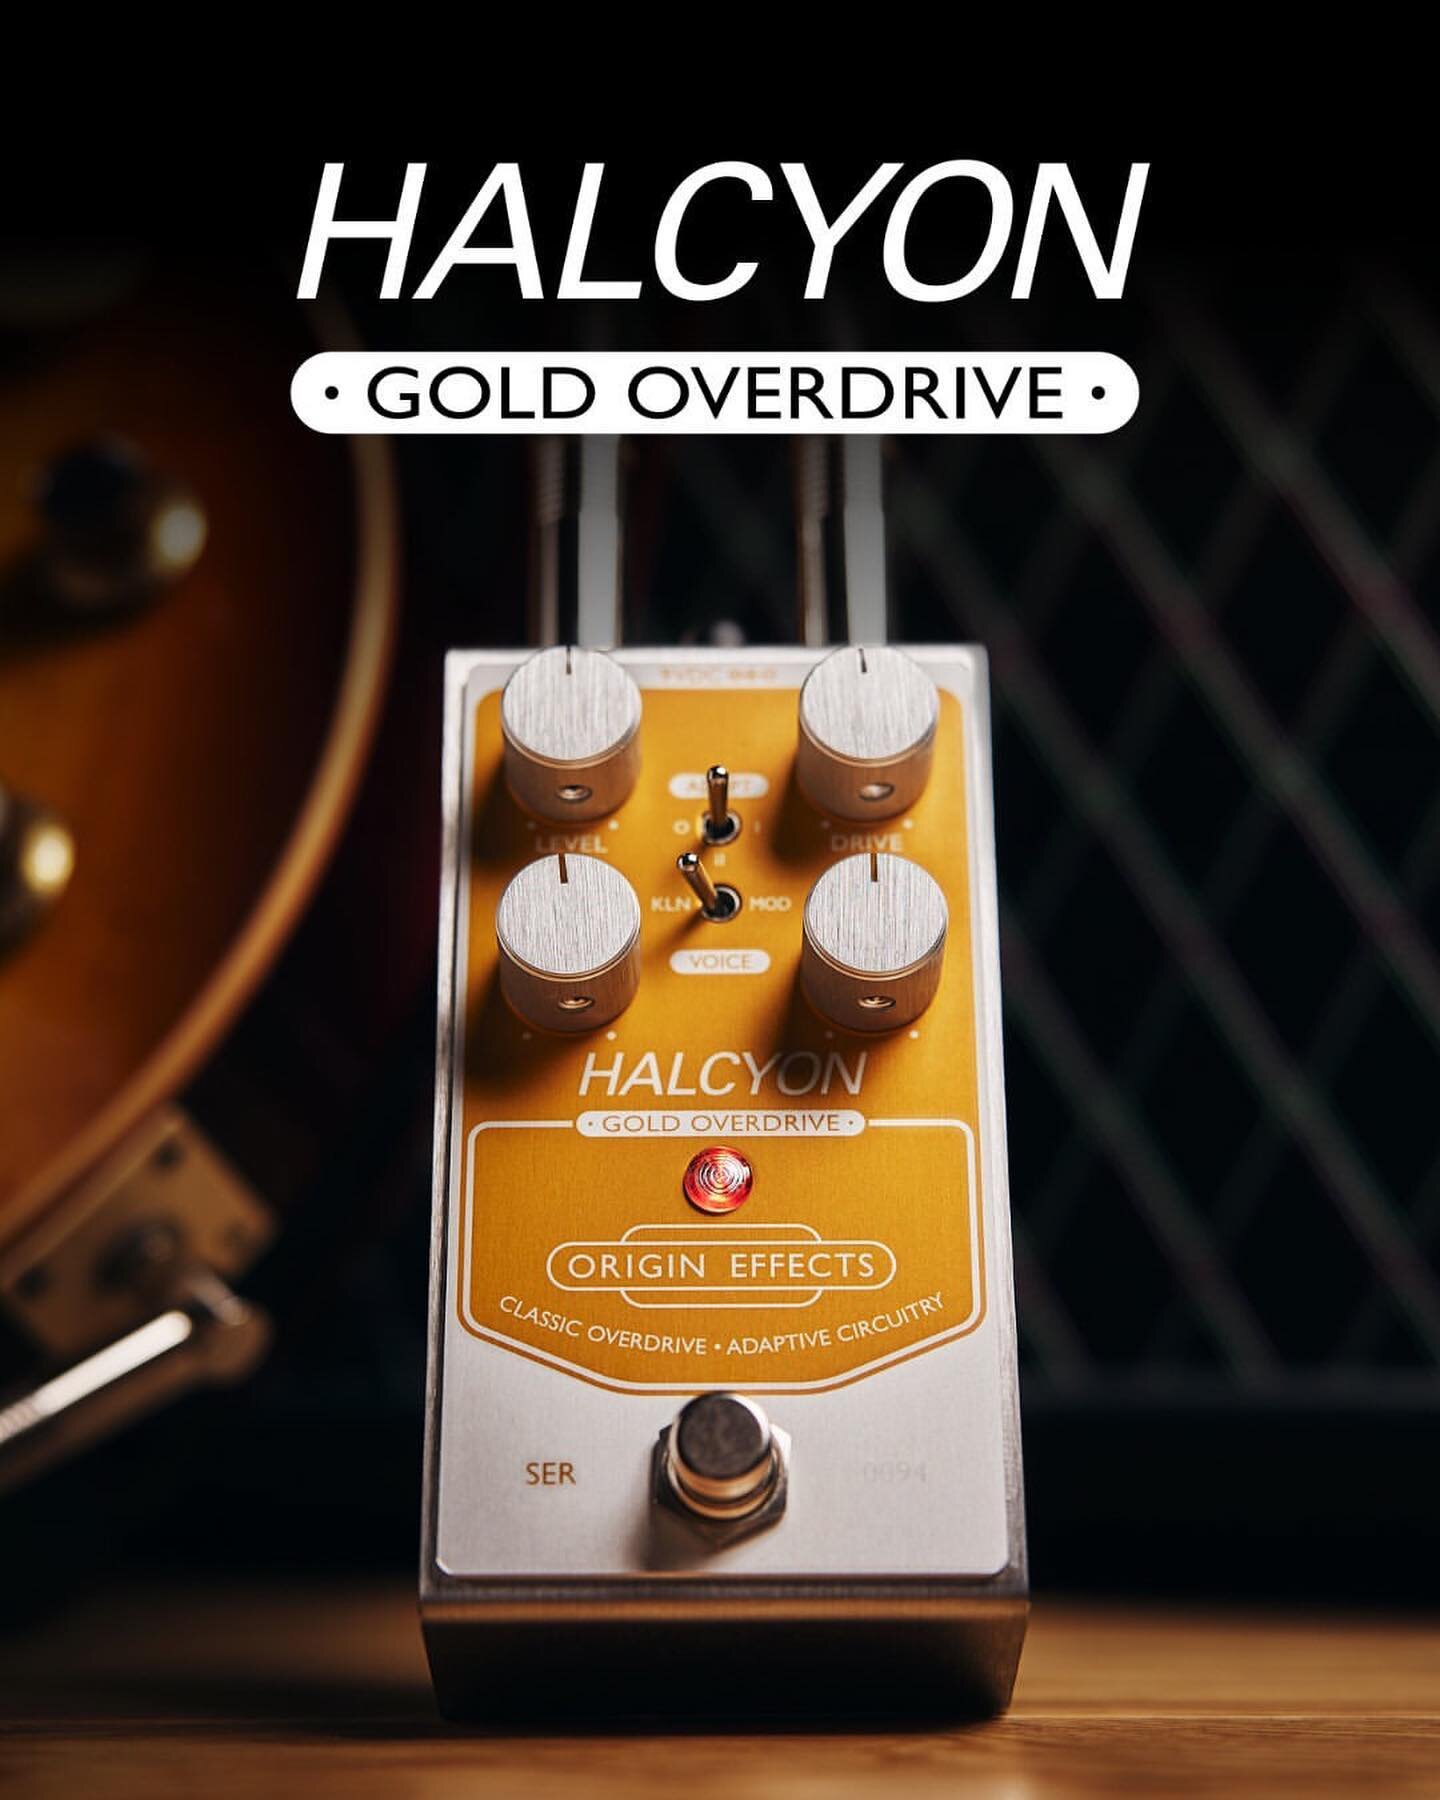 @origineffects has done it again! The new Halcyon Gold Overdrive is here! We&rsquo;ve sold through almost all of our stock already, but still have a couple left for in-store purchase only! Hit us up. 

Posted @withregram &bull; @origineffects Join us